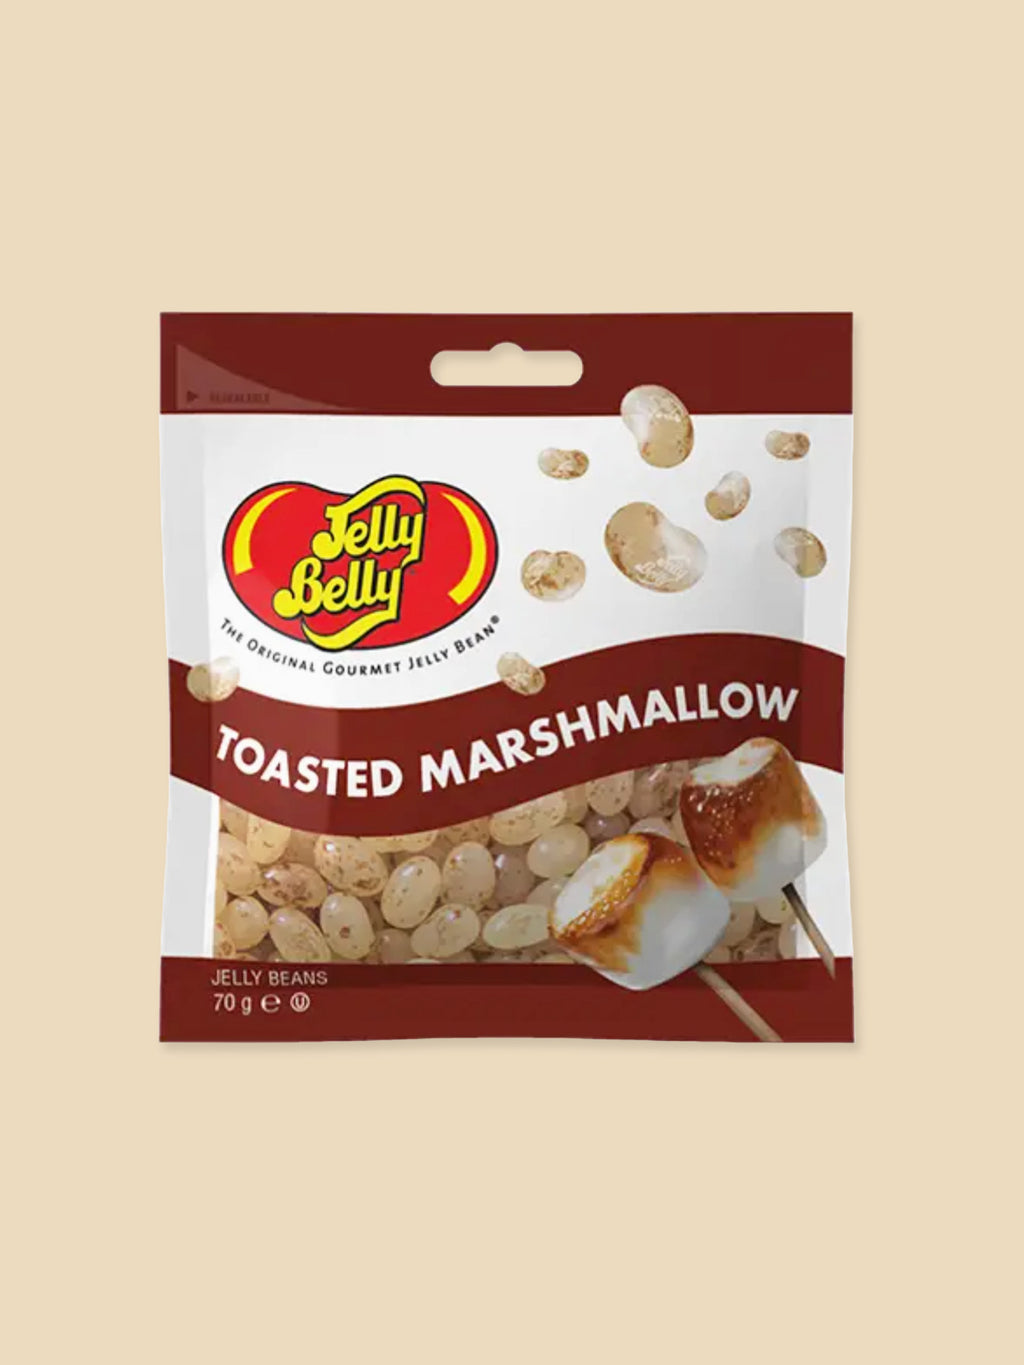 Jelly Belly Jelly Beans - Toasted Marshmallow - 70g